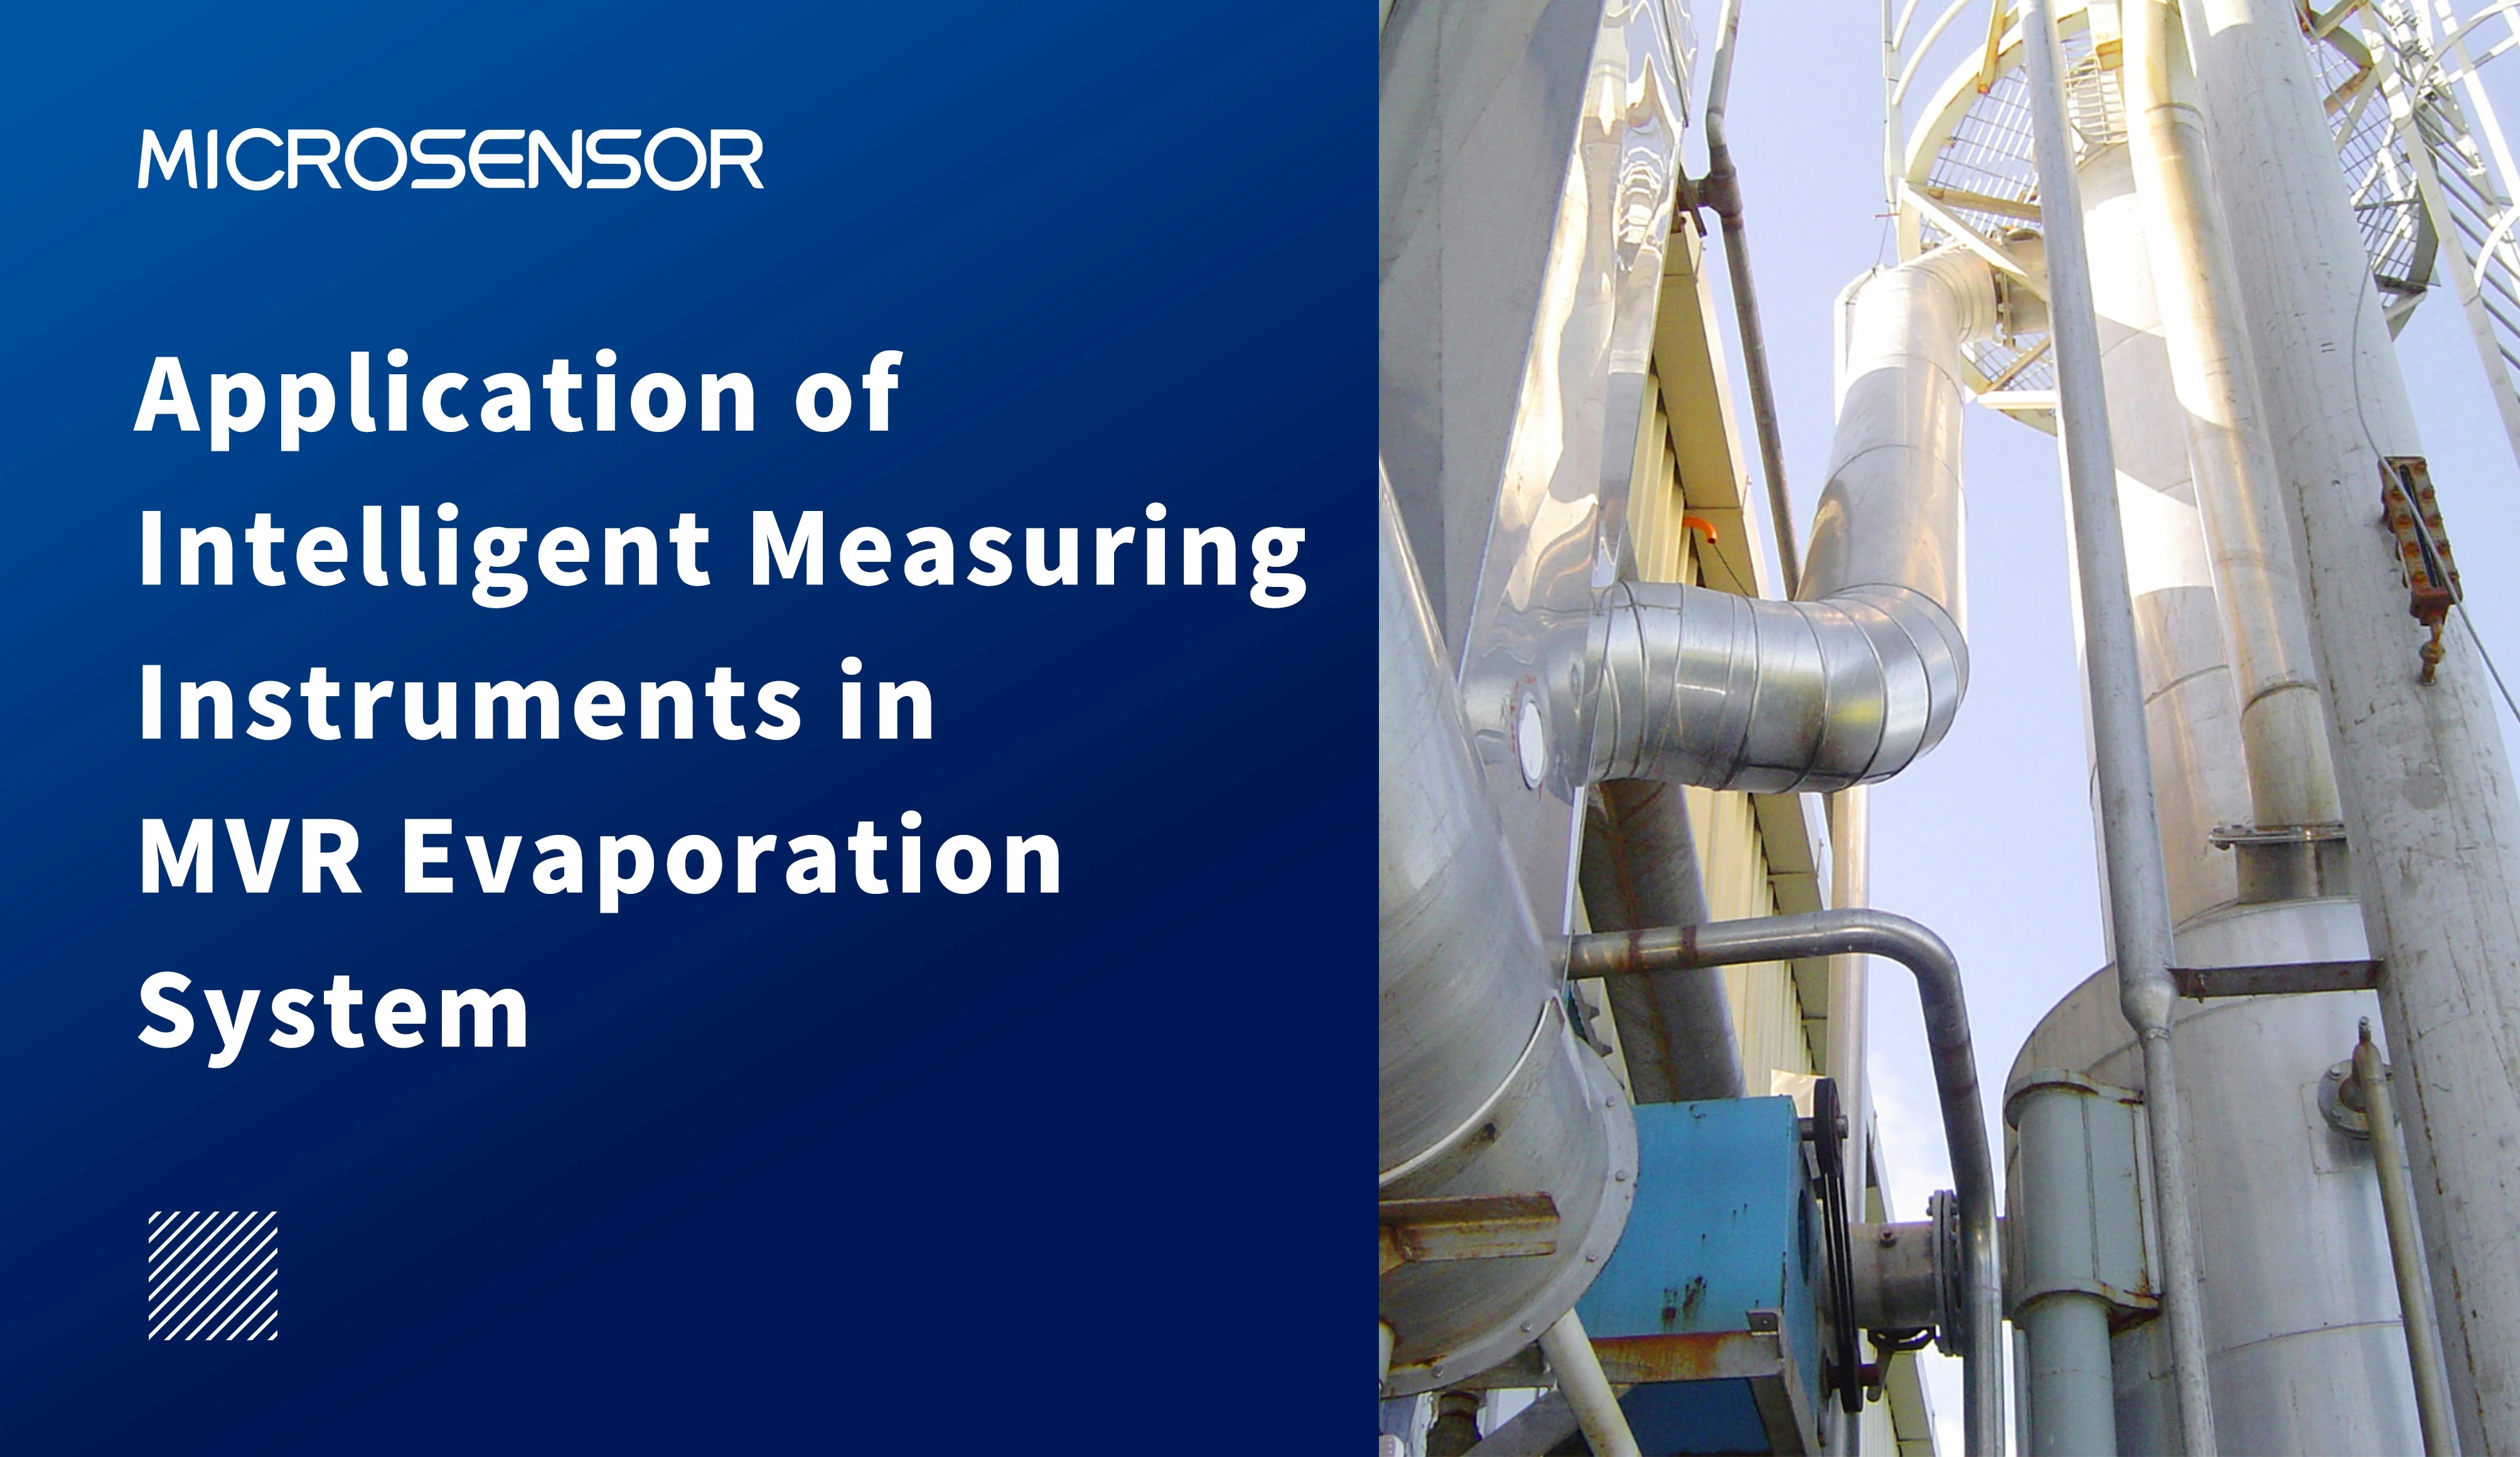 Application of Smart Instruments in MVR Evaporation System